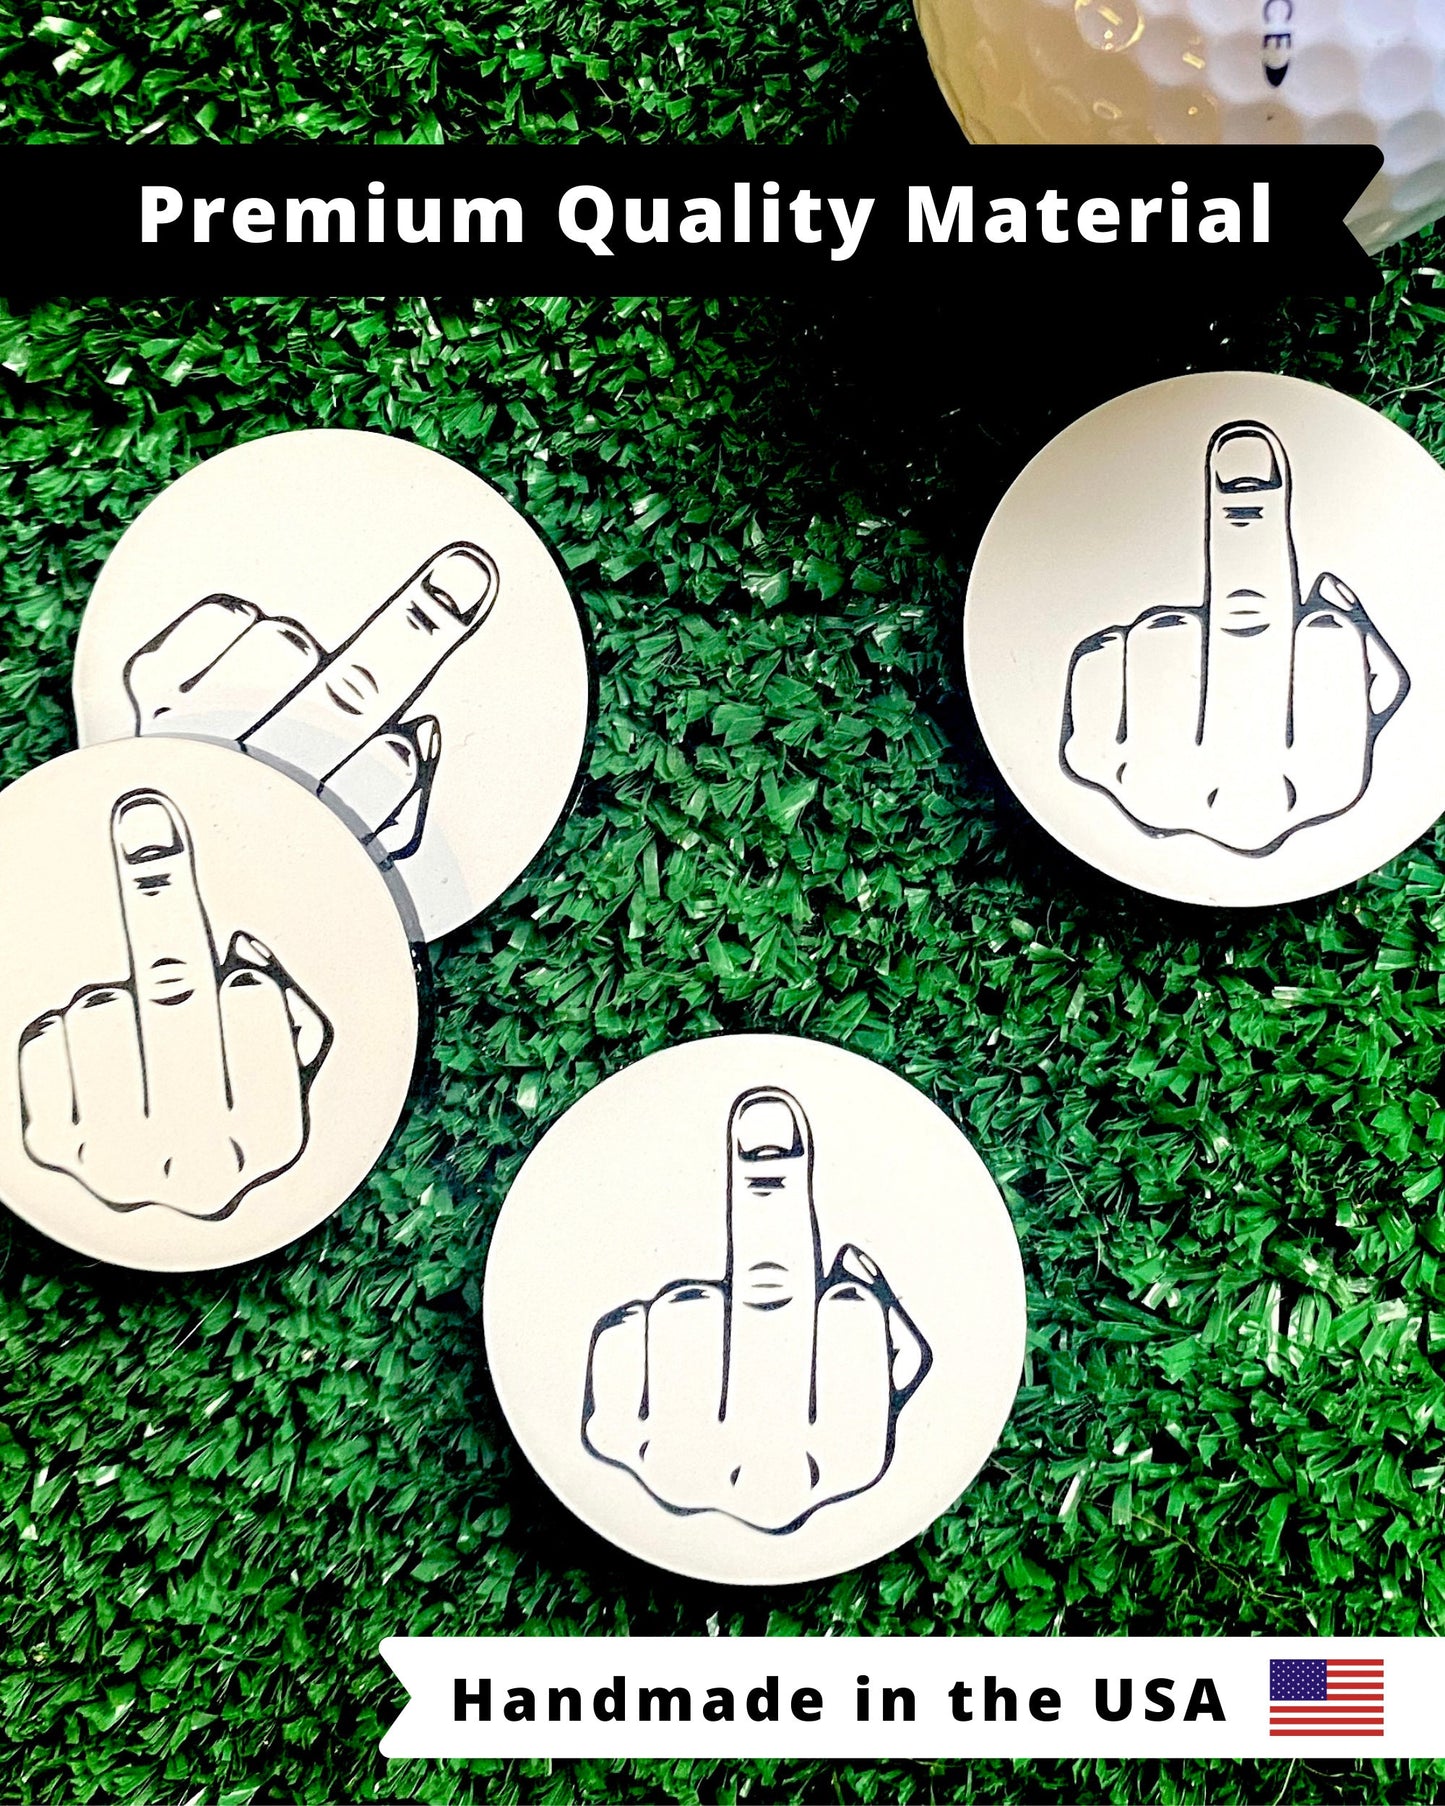 Golf Ball Markers Middle Finger Adult Humor Set of 4 | Dirty Gift for Golfer | Swear Funny Yankee Swap | Poker Chip Size